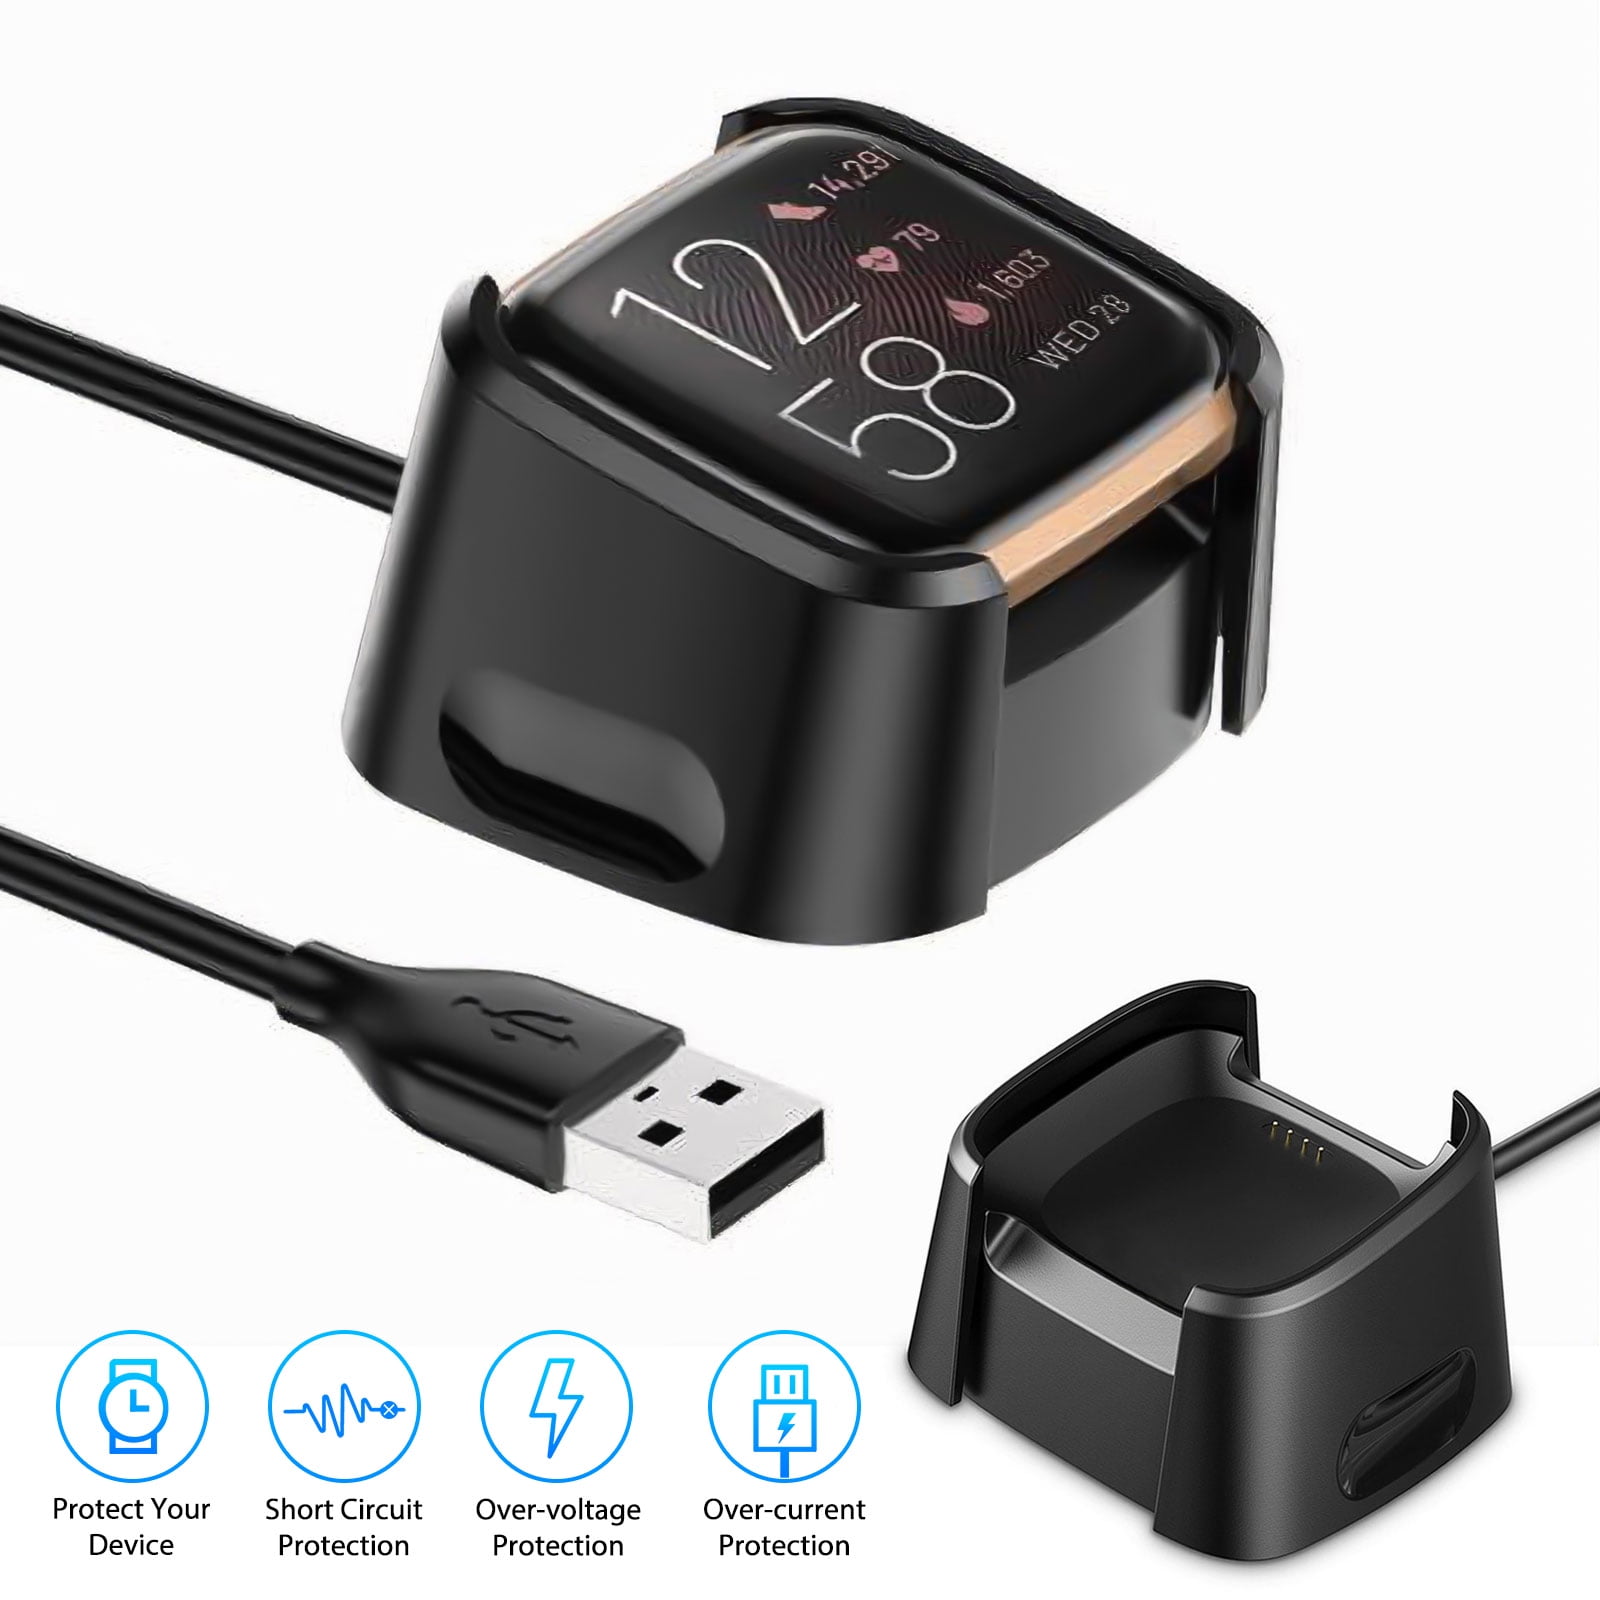 is the versa and versa 2 charger the same